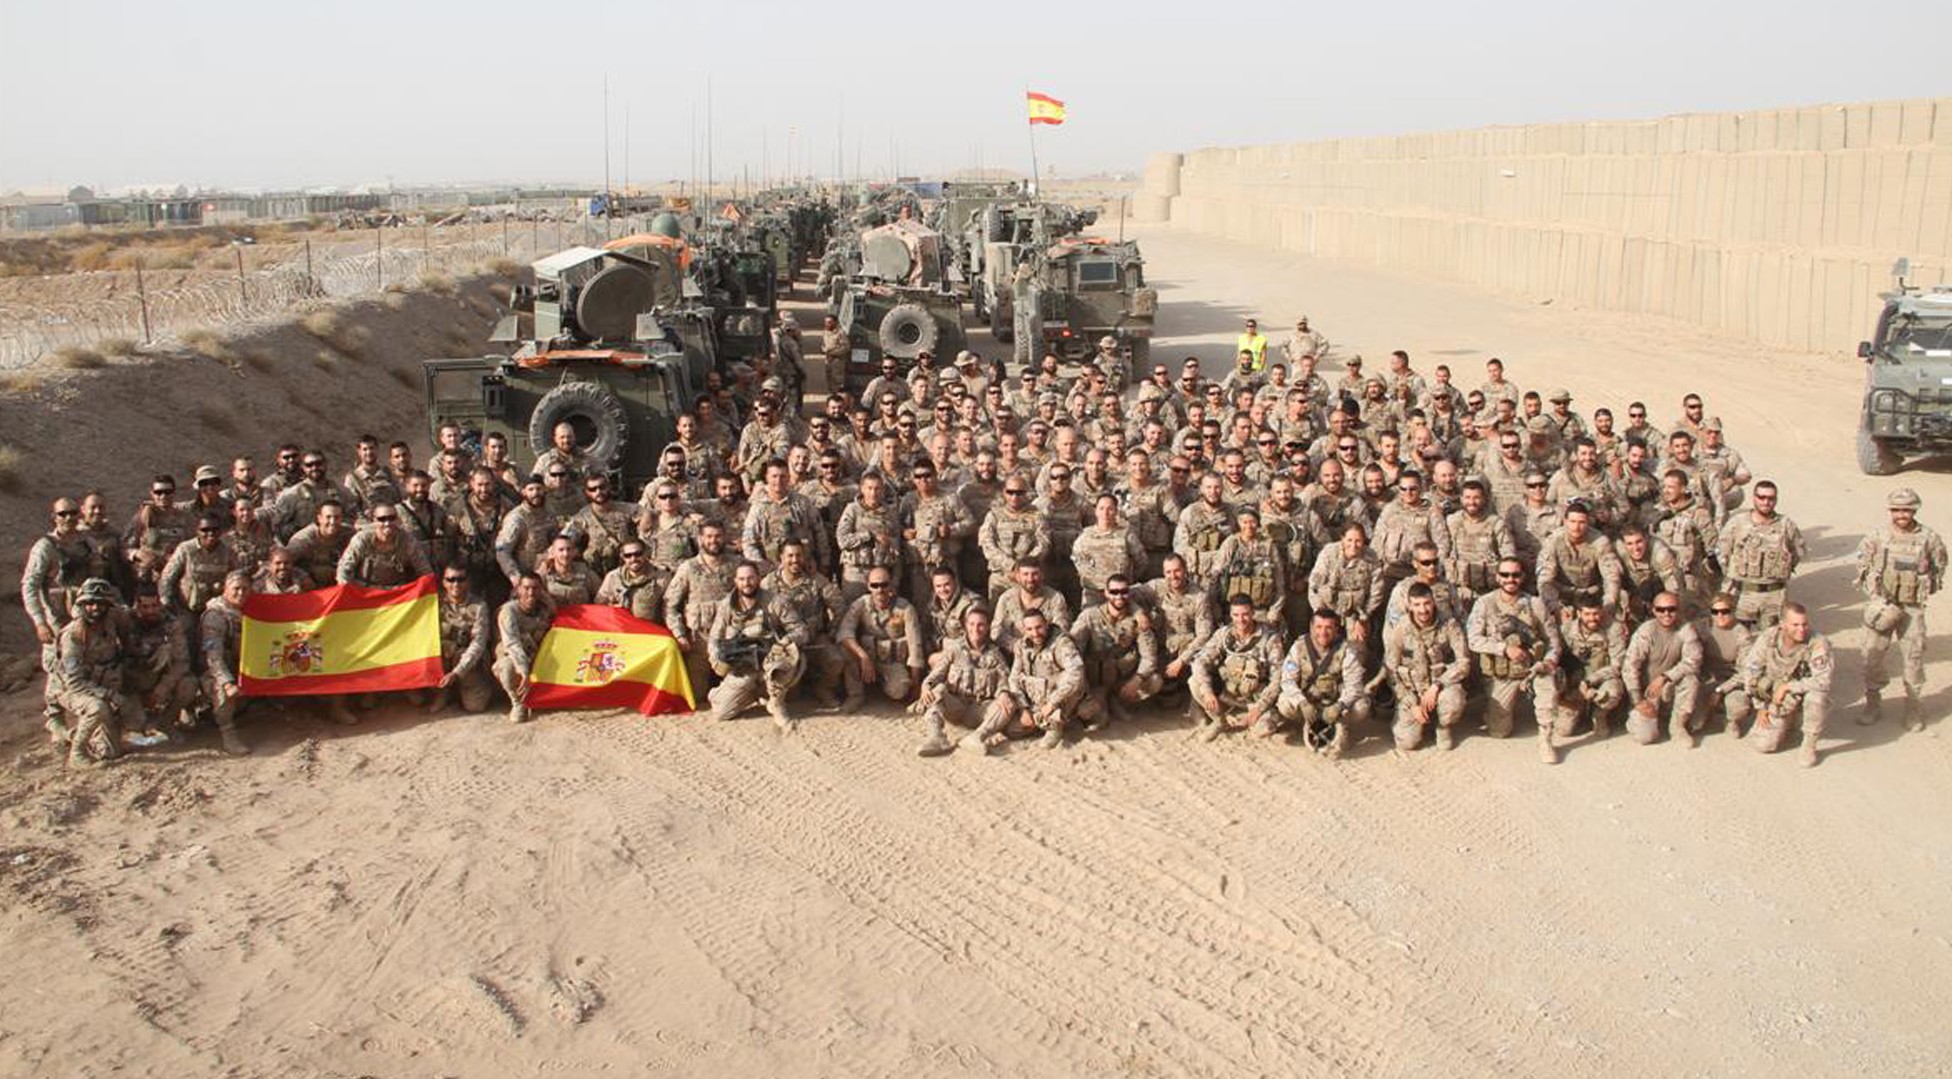 Air Force, Land Forces and Navy of Spain